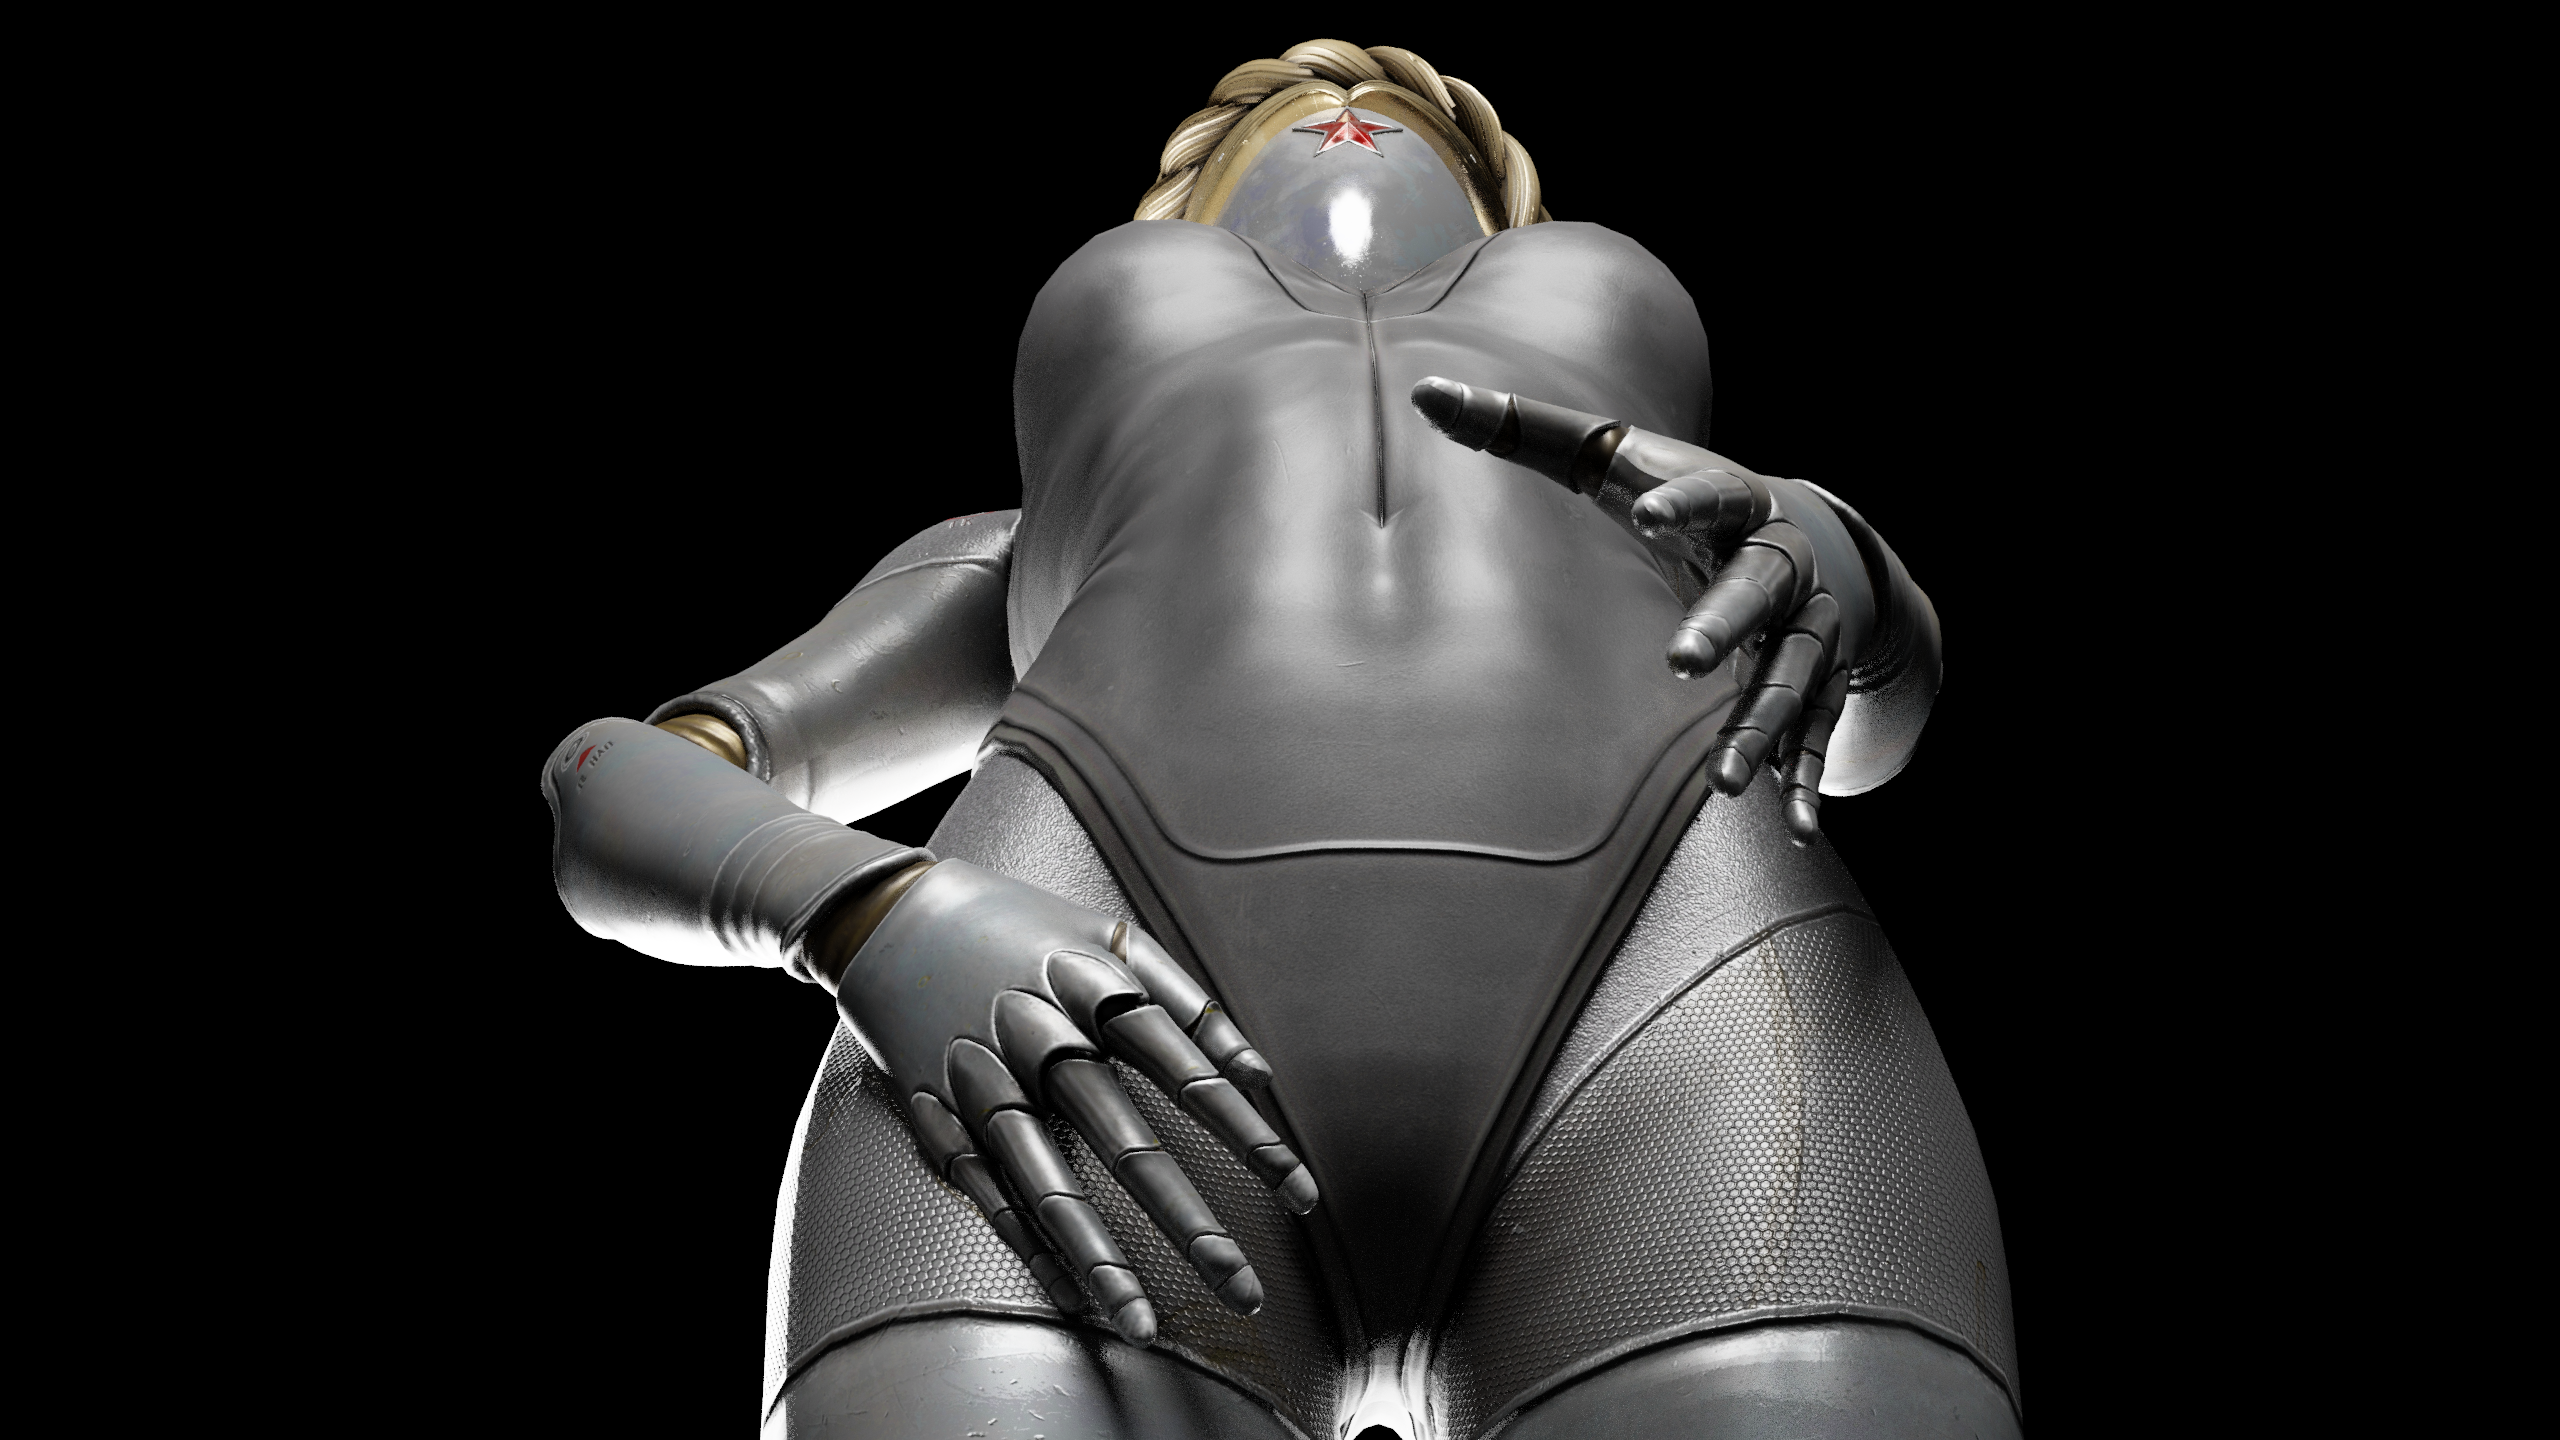 General 2560x1440 Atomic Heart Game Mod robot simple background minimalism Grille tight clothing ecchi lewd black background video game characters CGI